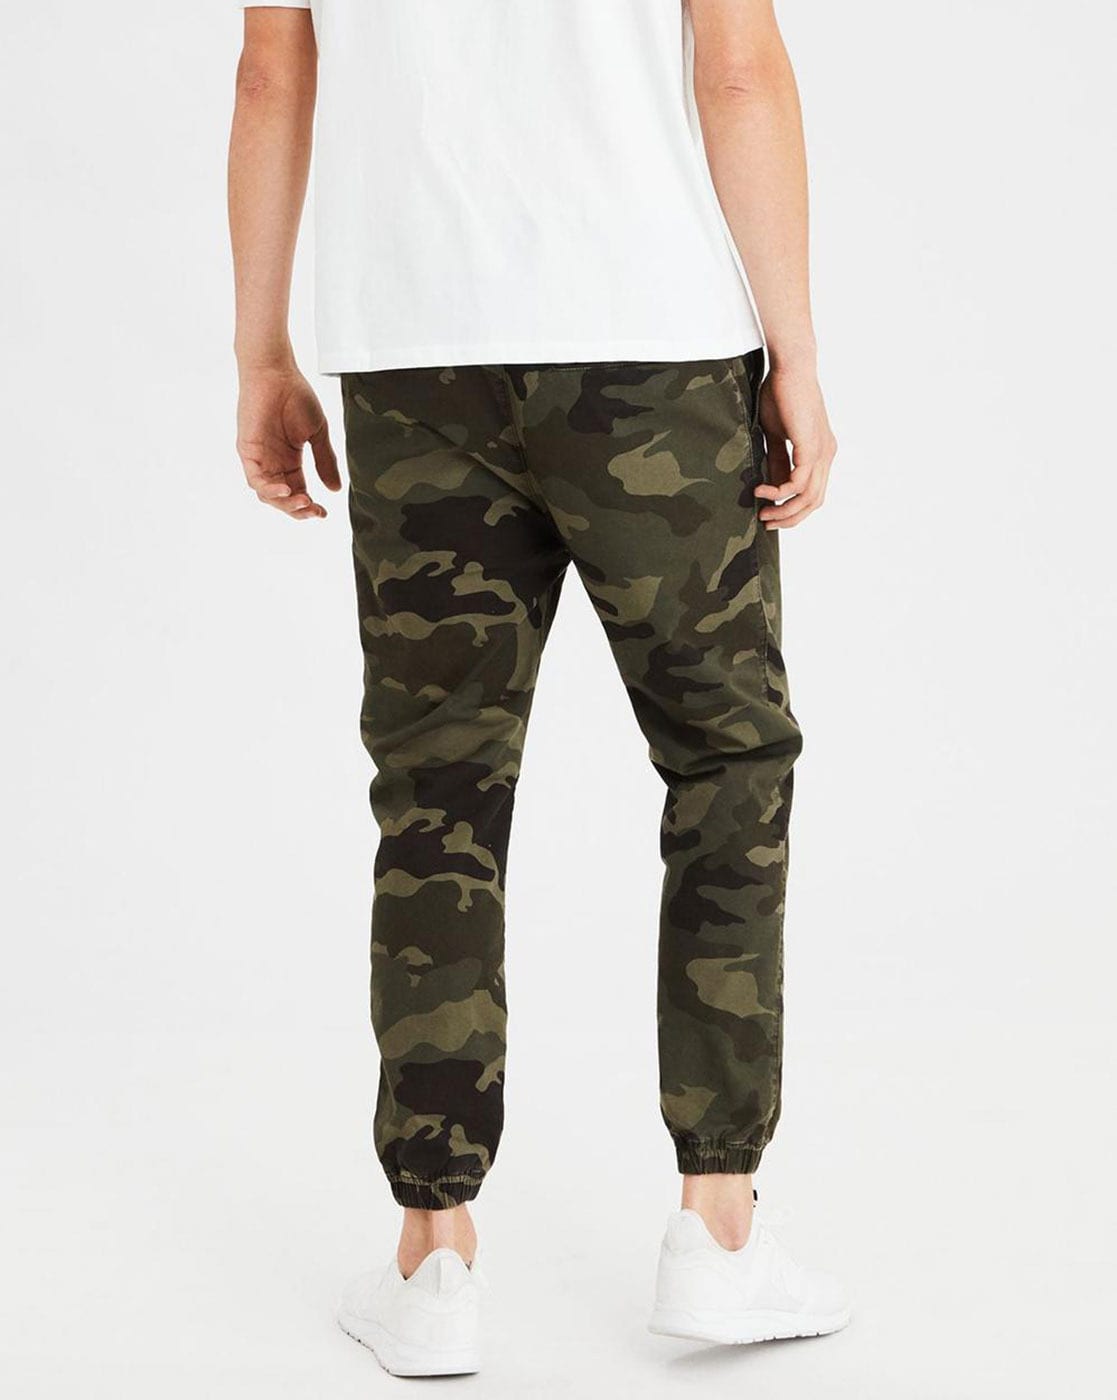 Buy Green Track Pants for Men by American Eagle Outfitters Online  Ajiocom